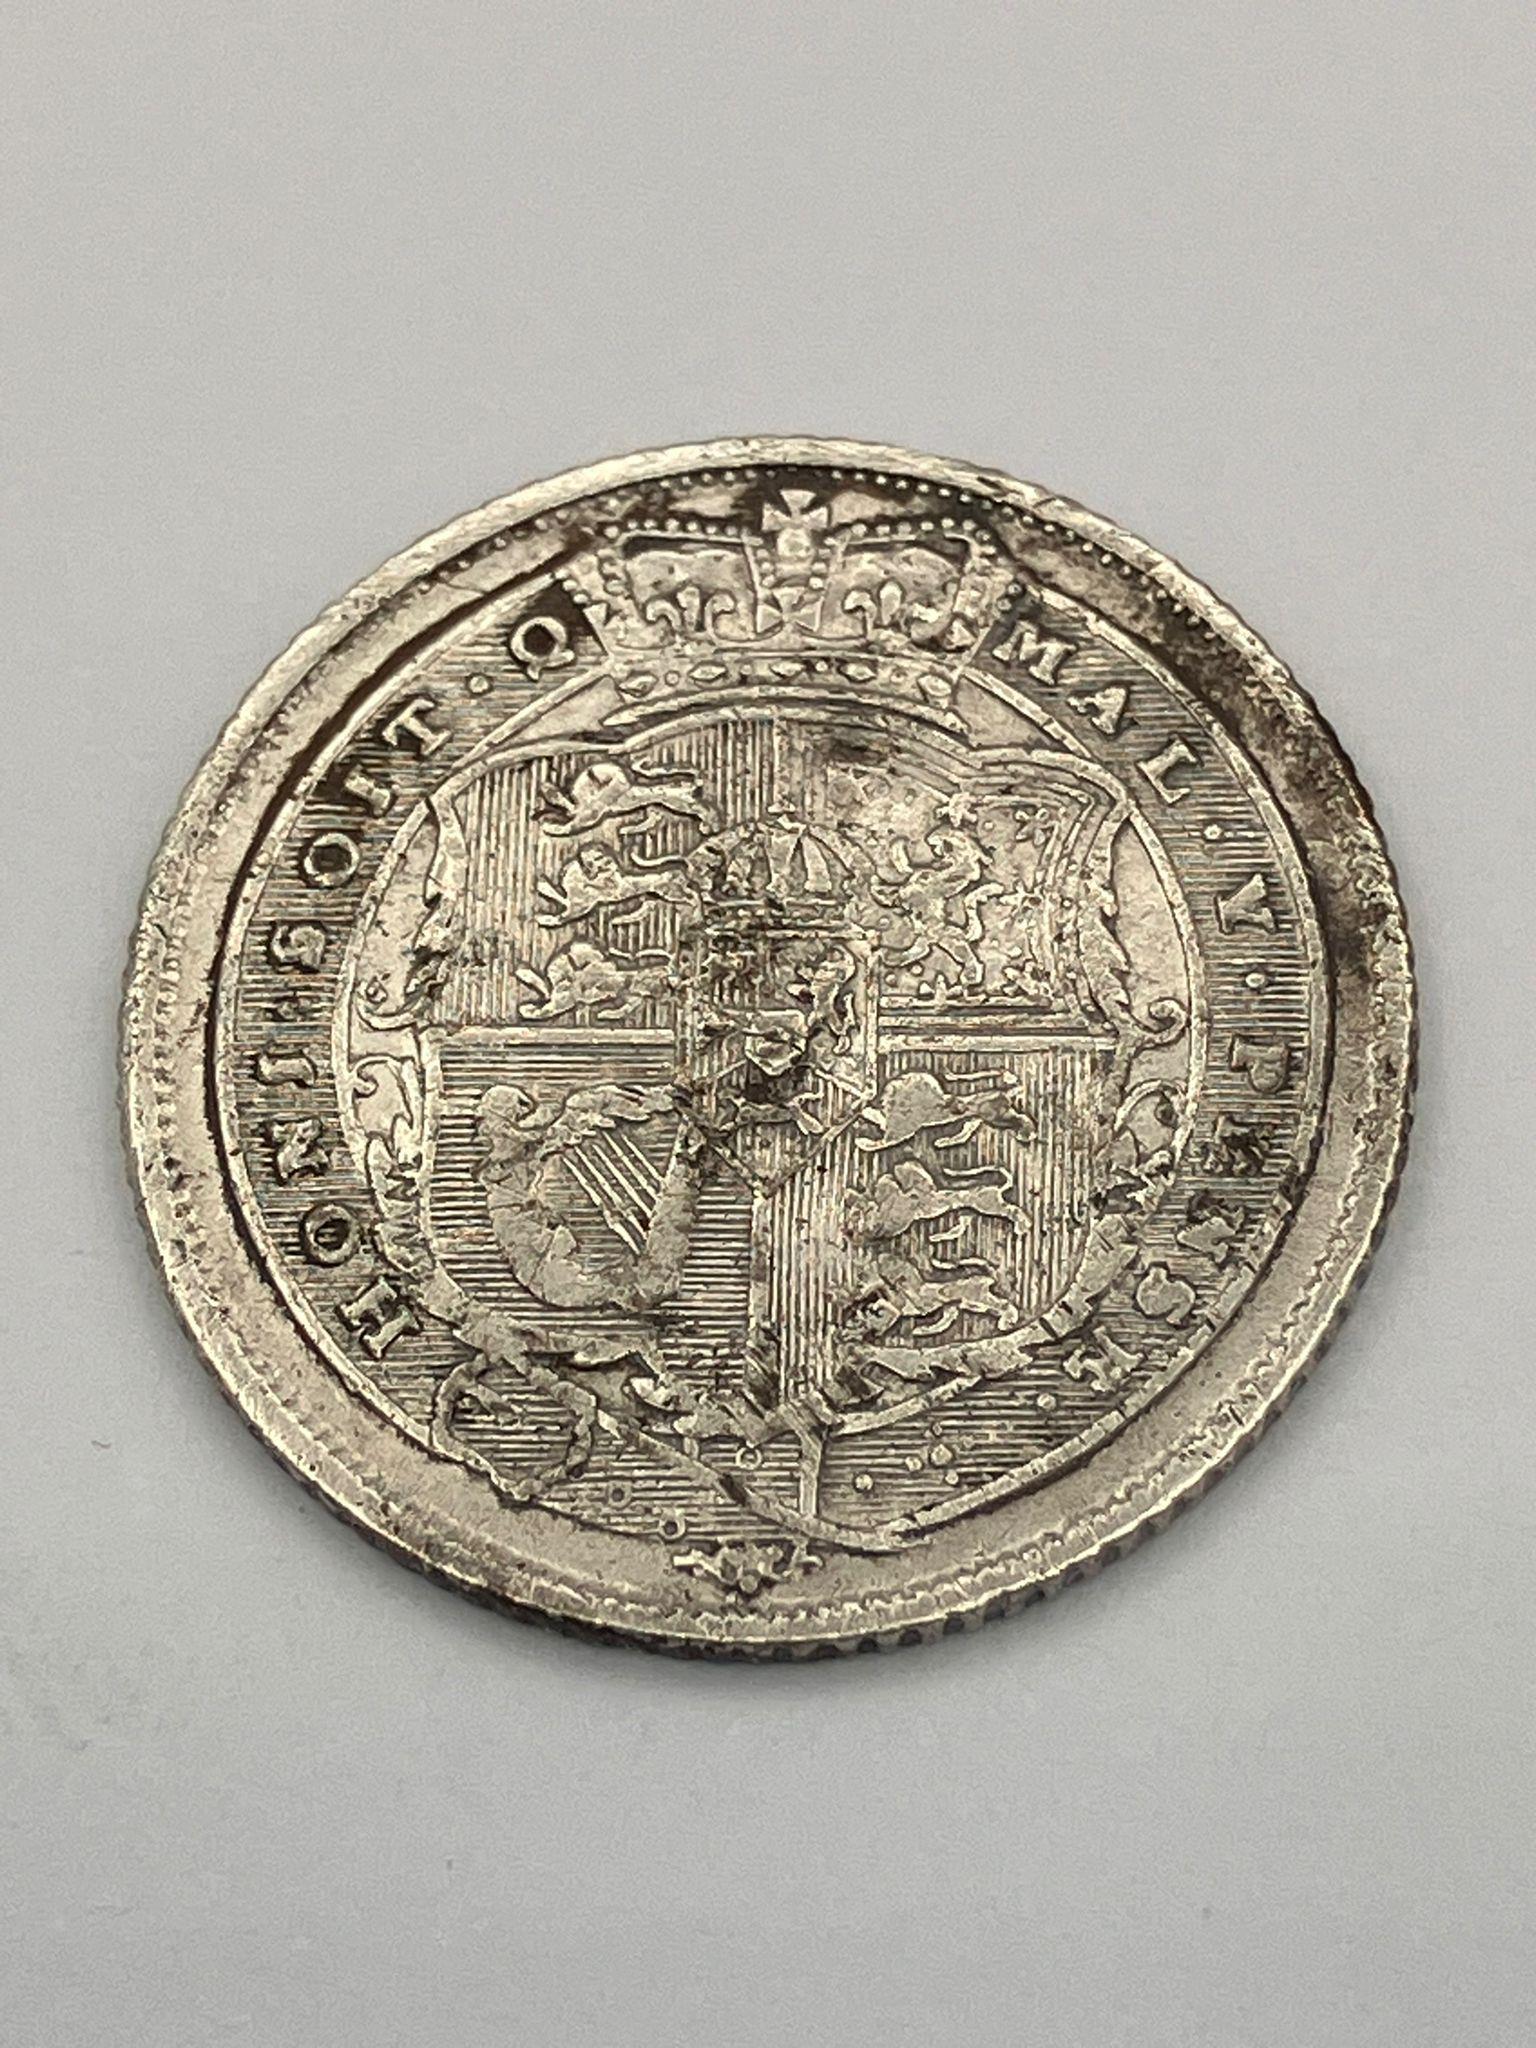 1820 GEORGE III SILVER SIXPENCE. Fine/very fine condition. Would benefit from a gentle clean. - Image 2 of 2